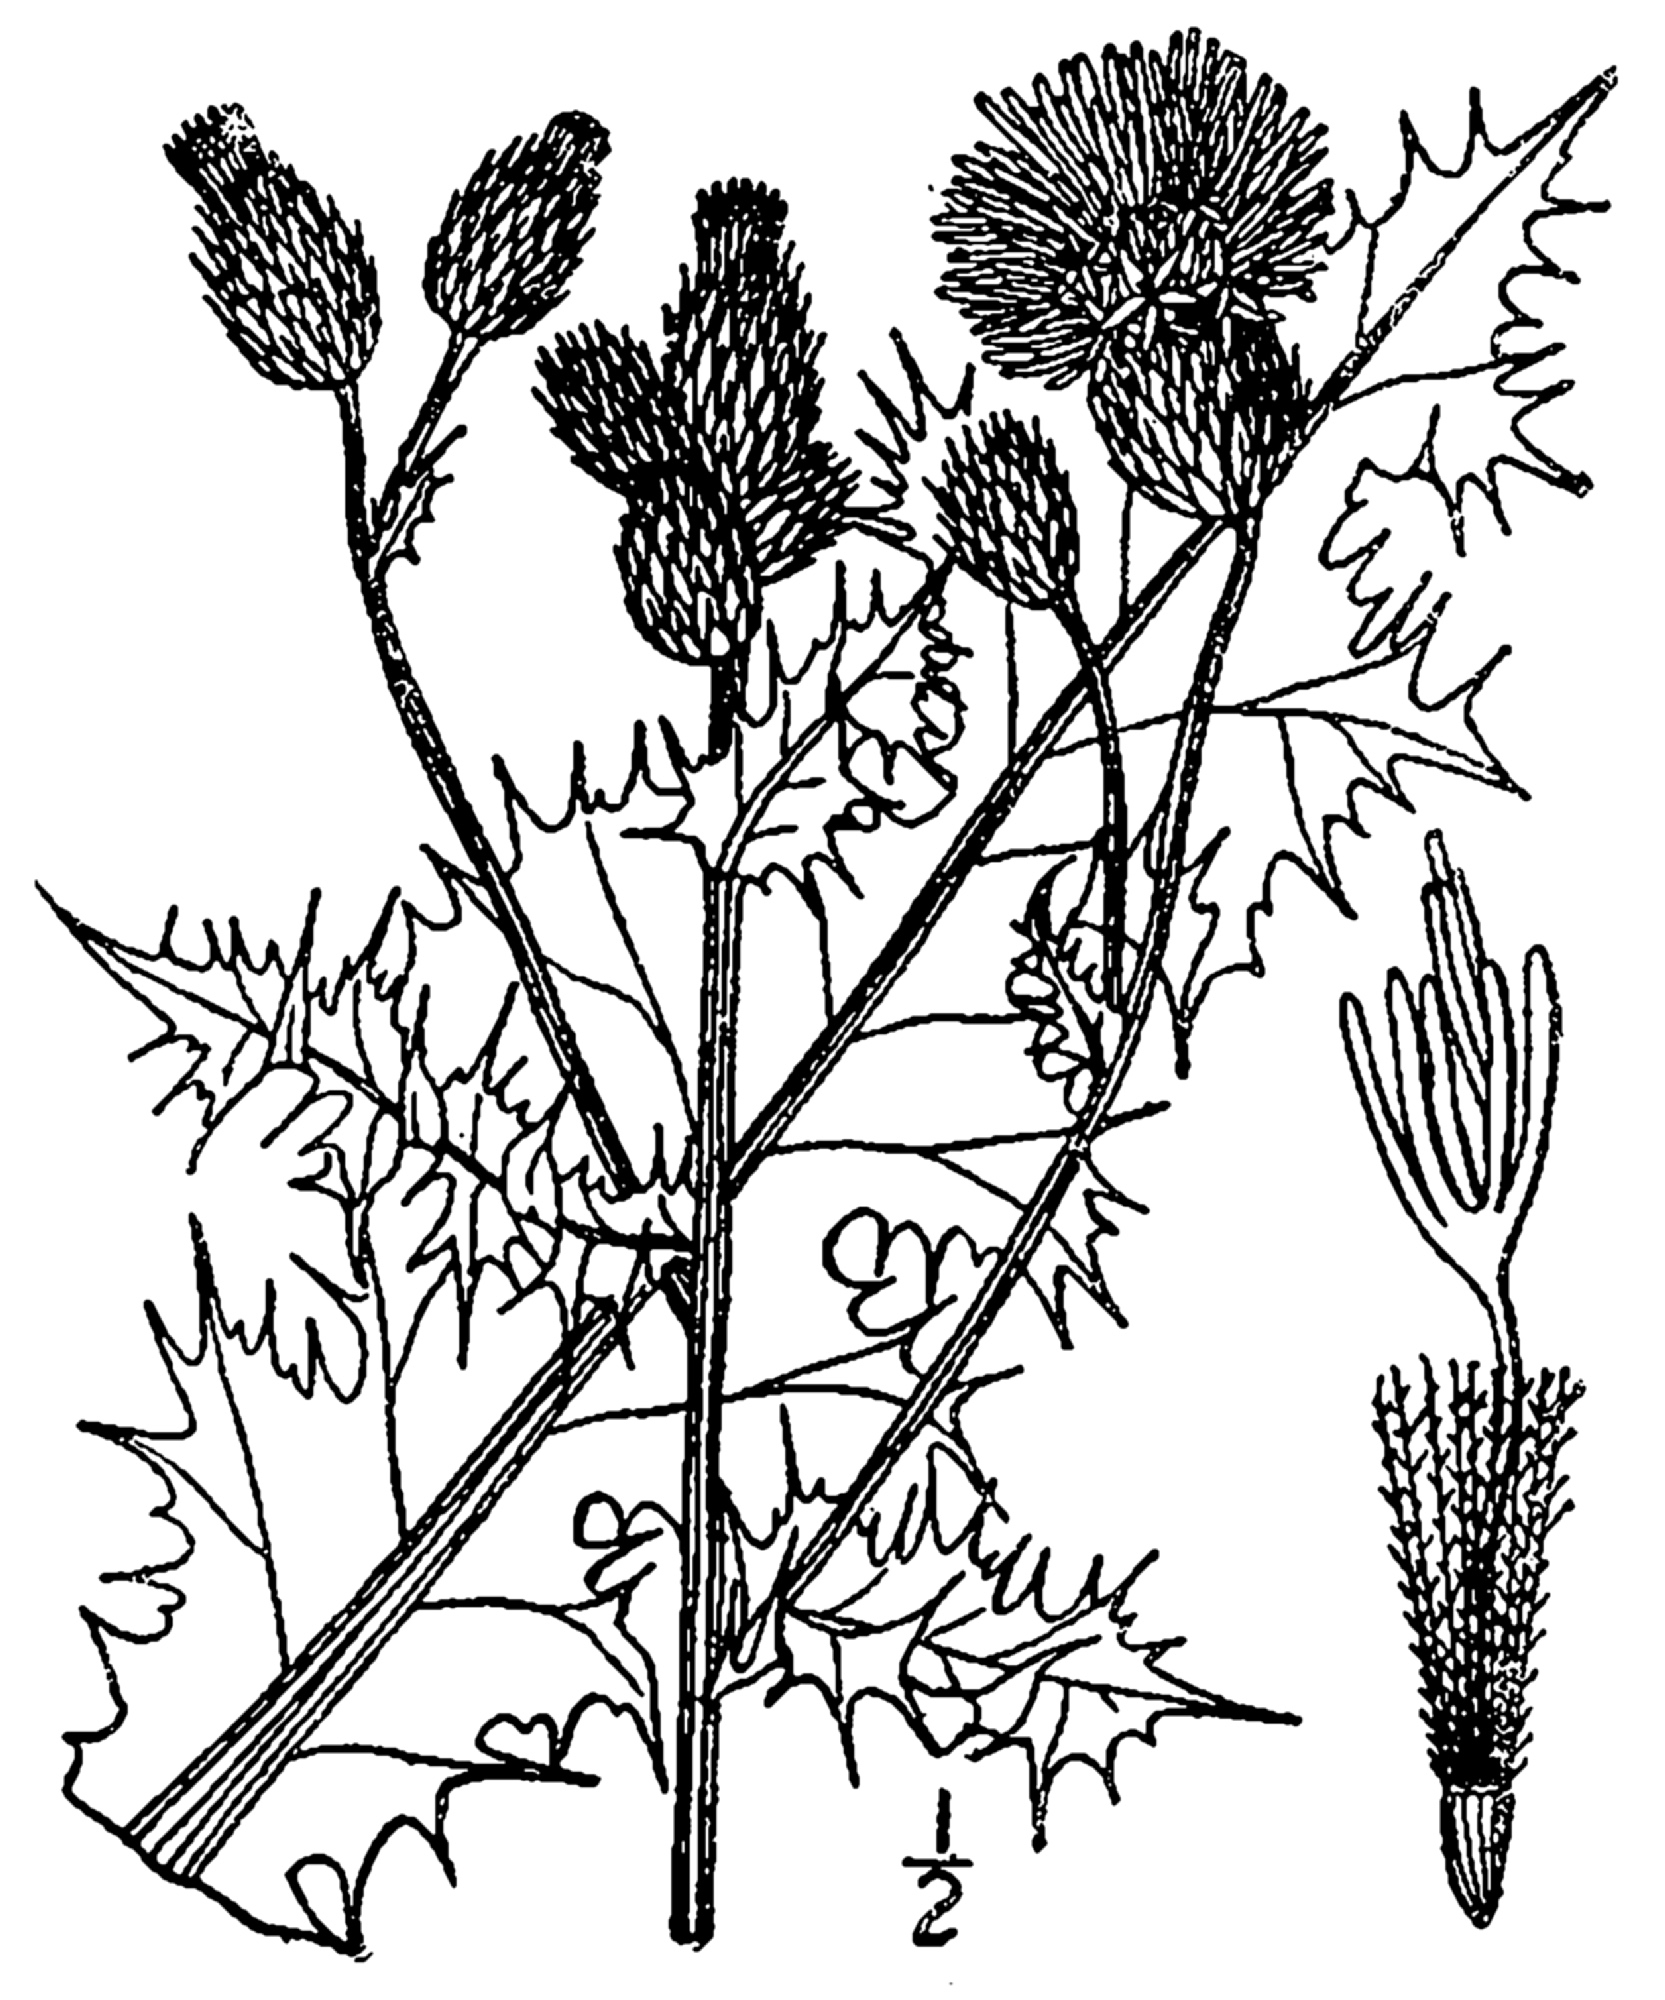 1913 Canada Thistle drawing.